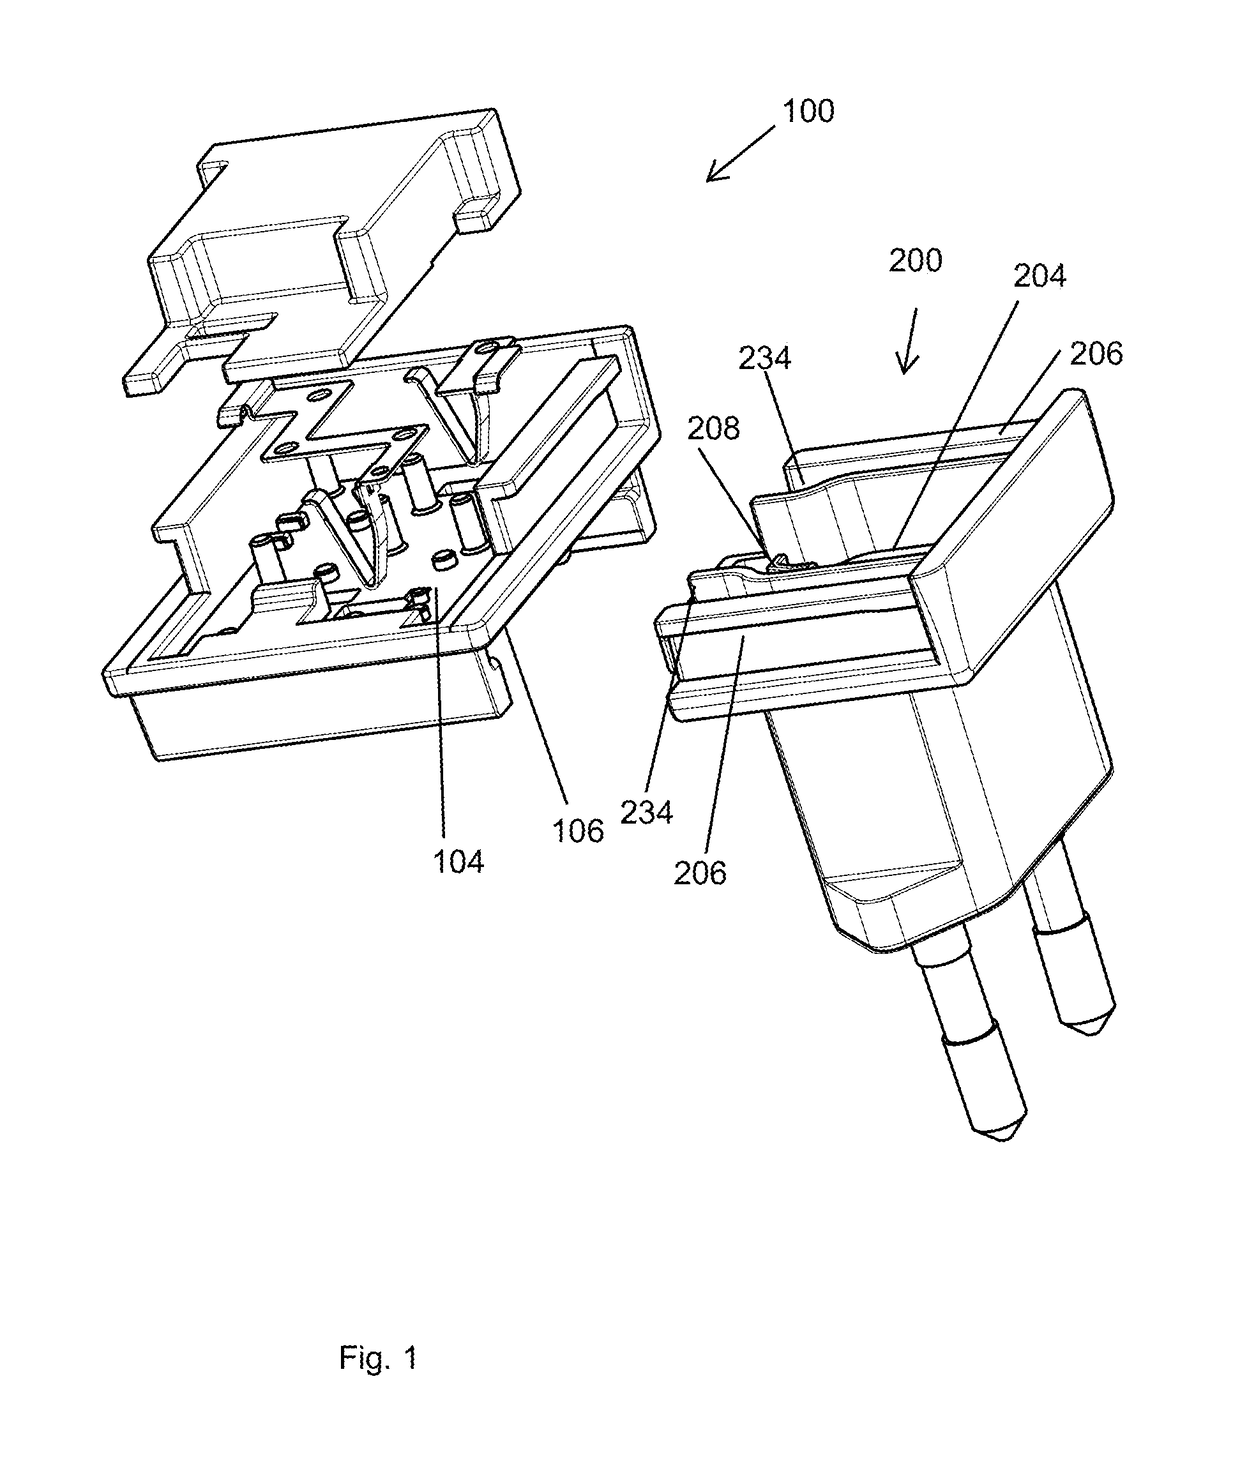 Intermediate adapter for attaching a connector unit to an appliance, and power supply kit